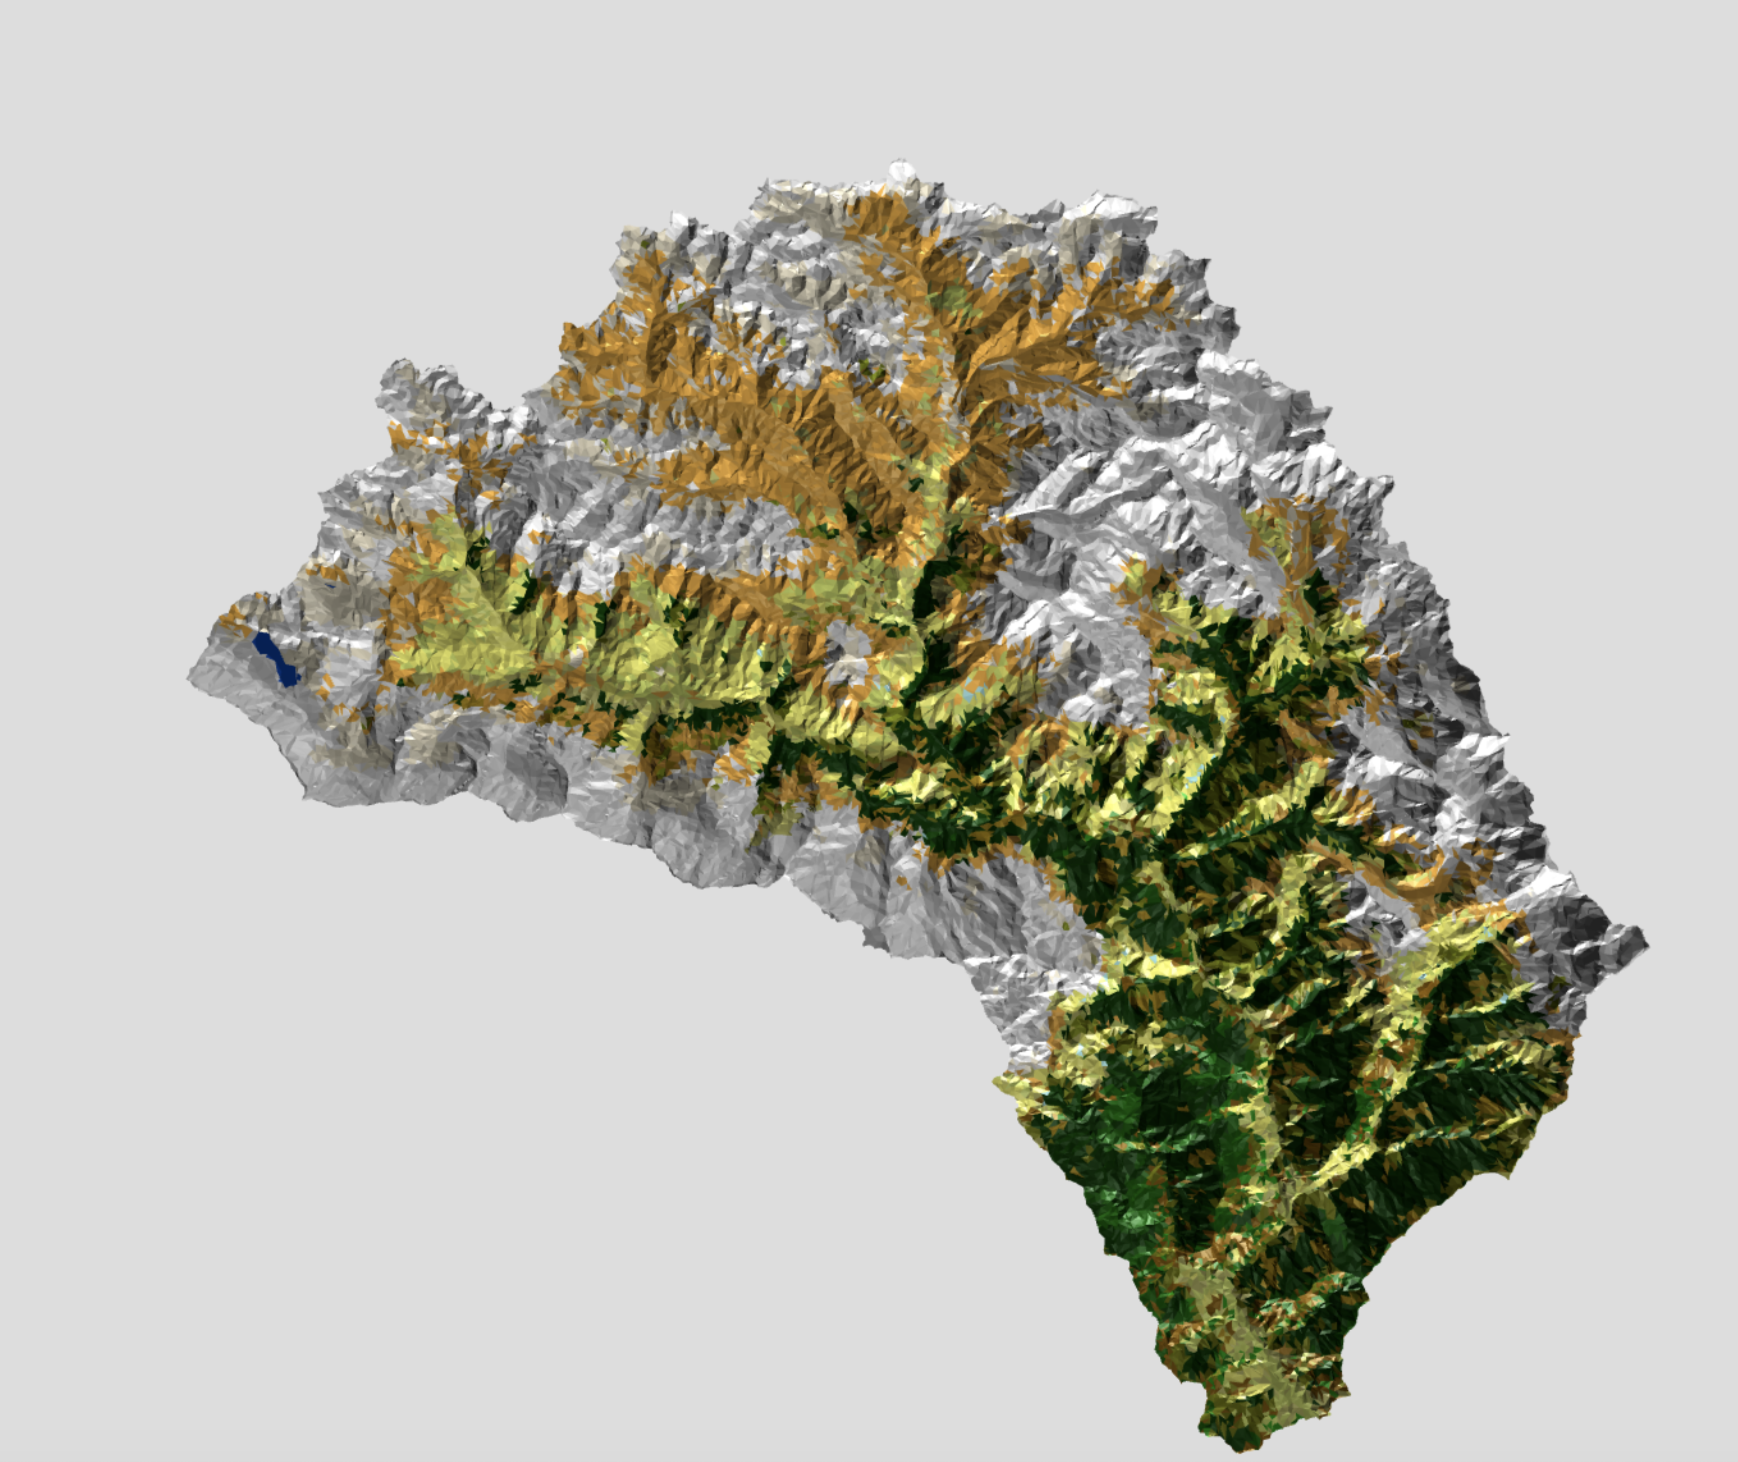 Fine Mesh for the Langtang catchment in Nepal, generated with the newly developed tools.